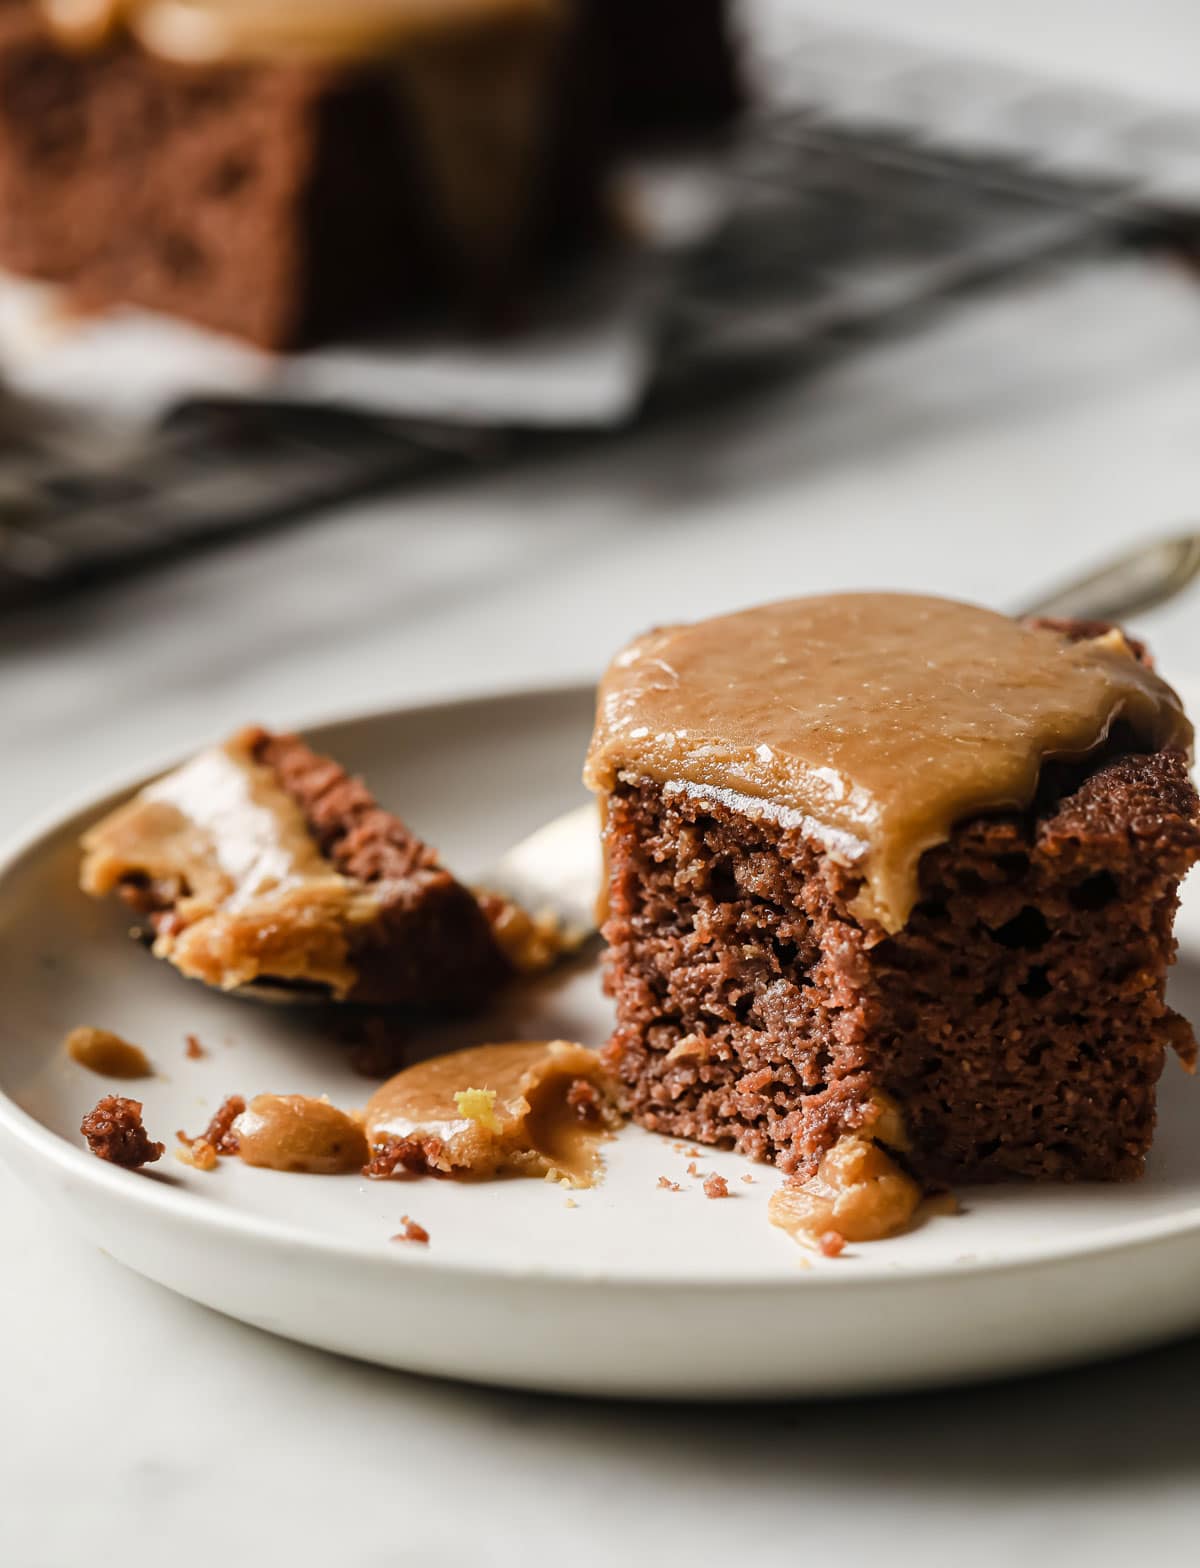 a slice of gluten free sticky toffee pudding topped with caramel sauce on a plate with a fork